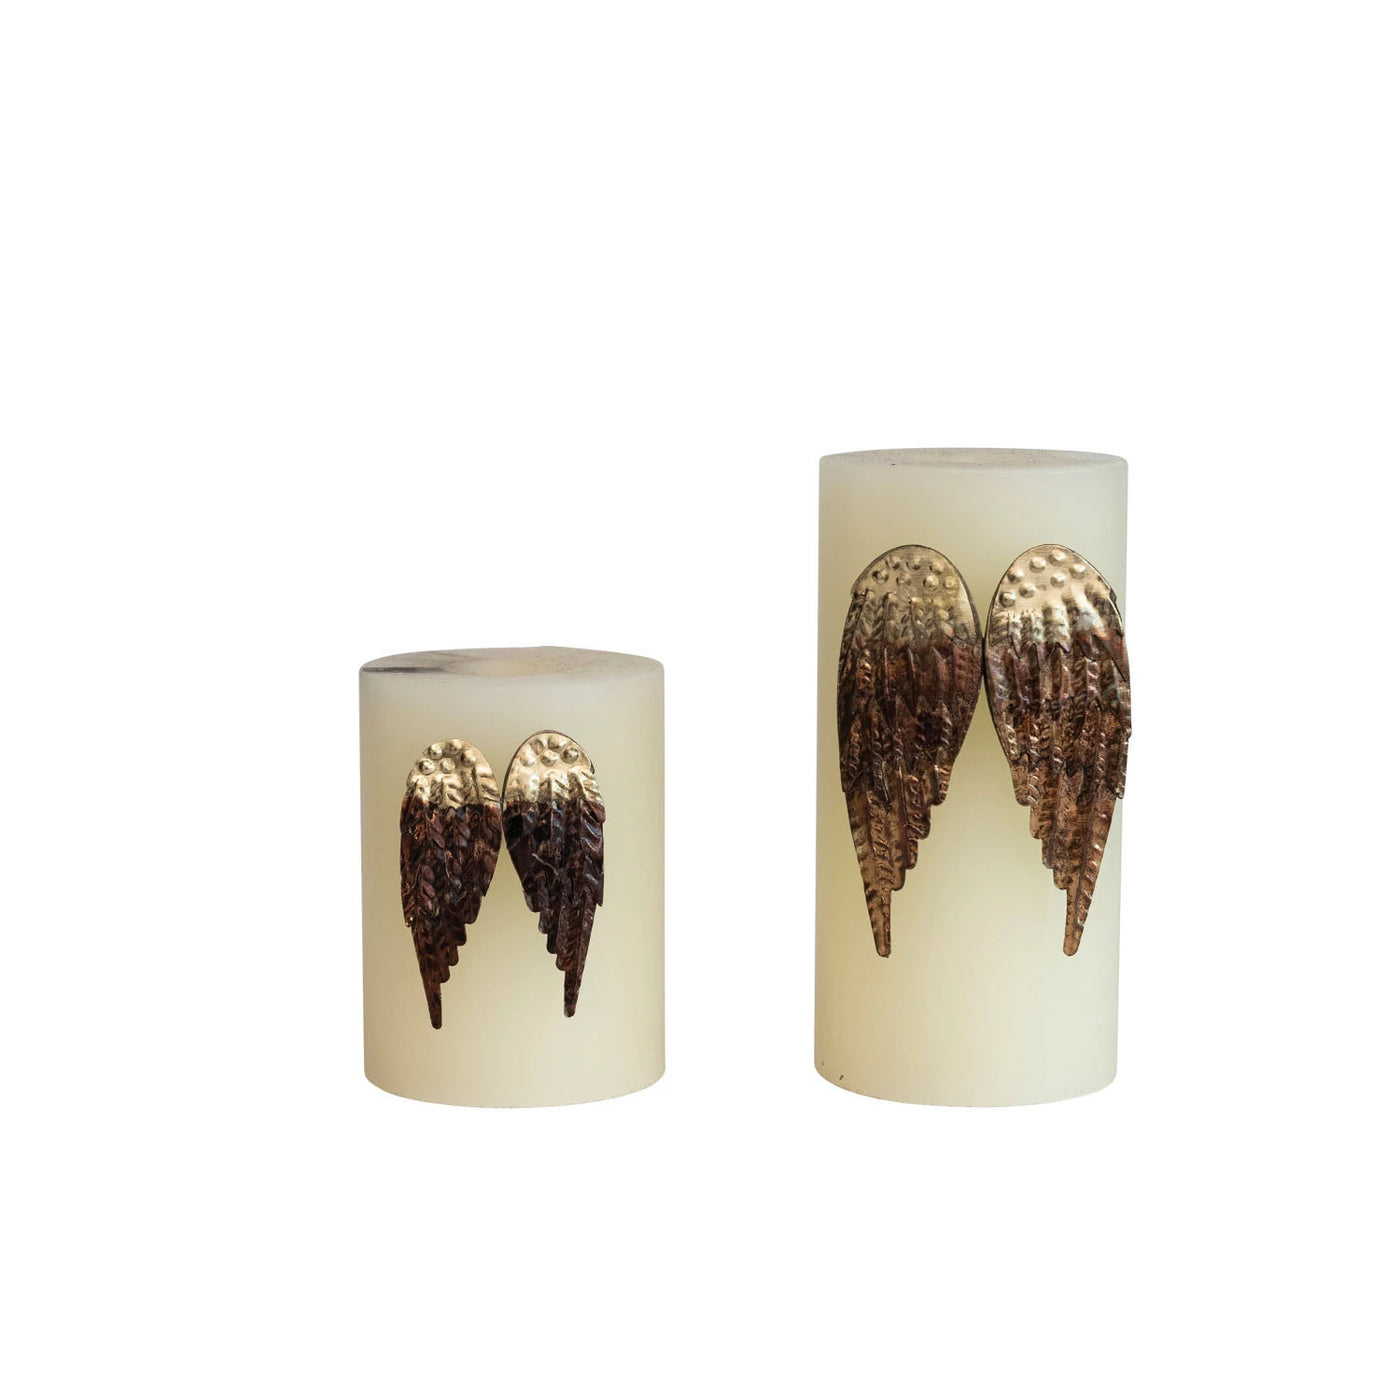 Set of 2 Angel Wings Candle Pins